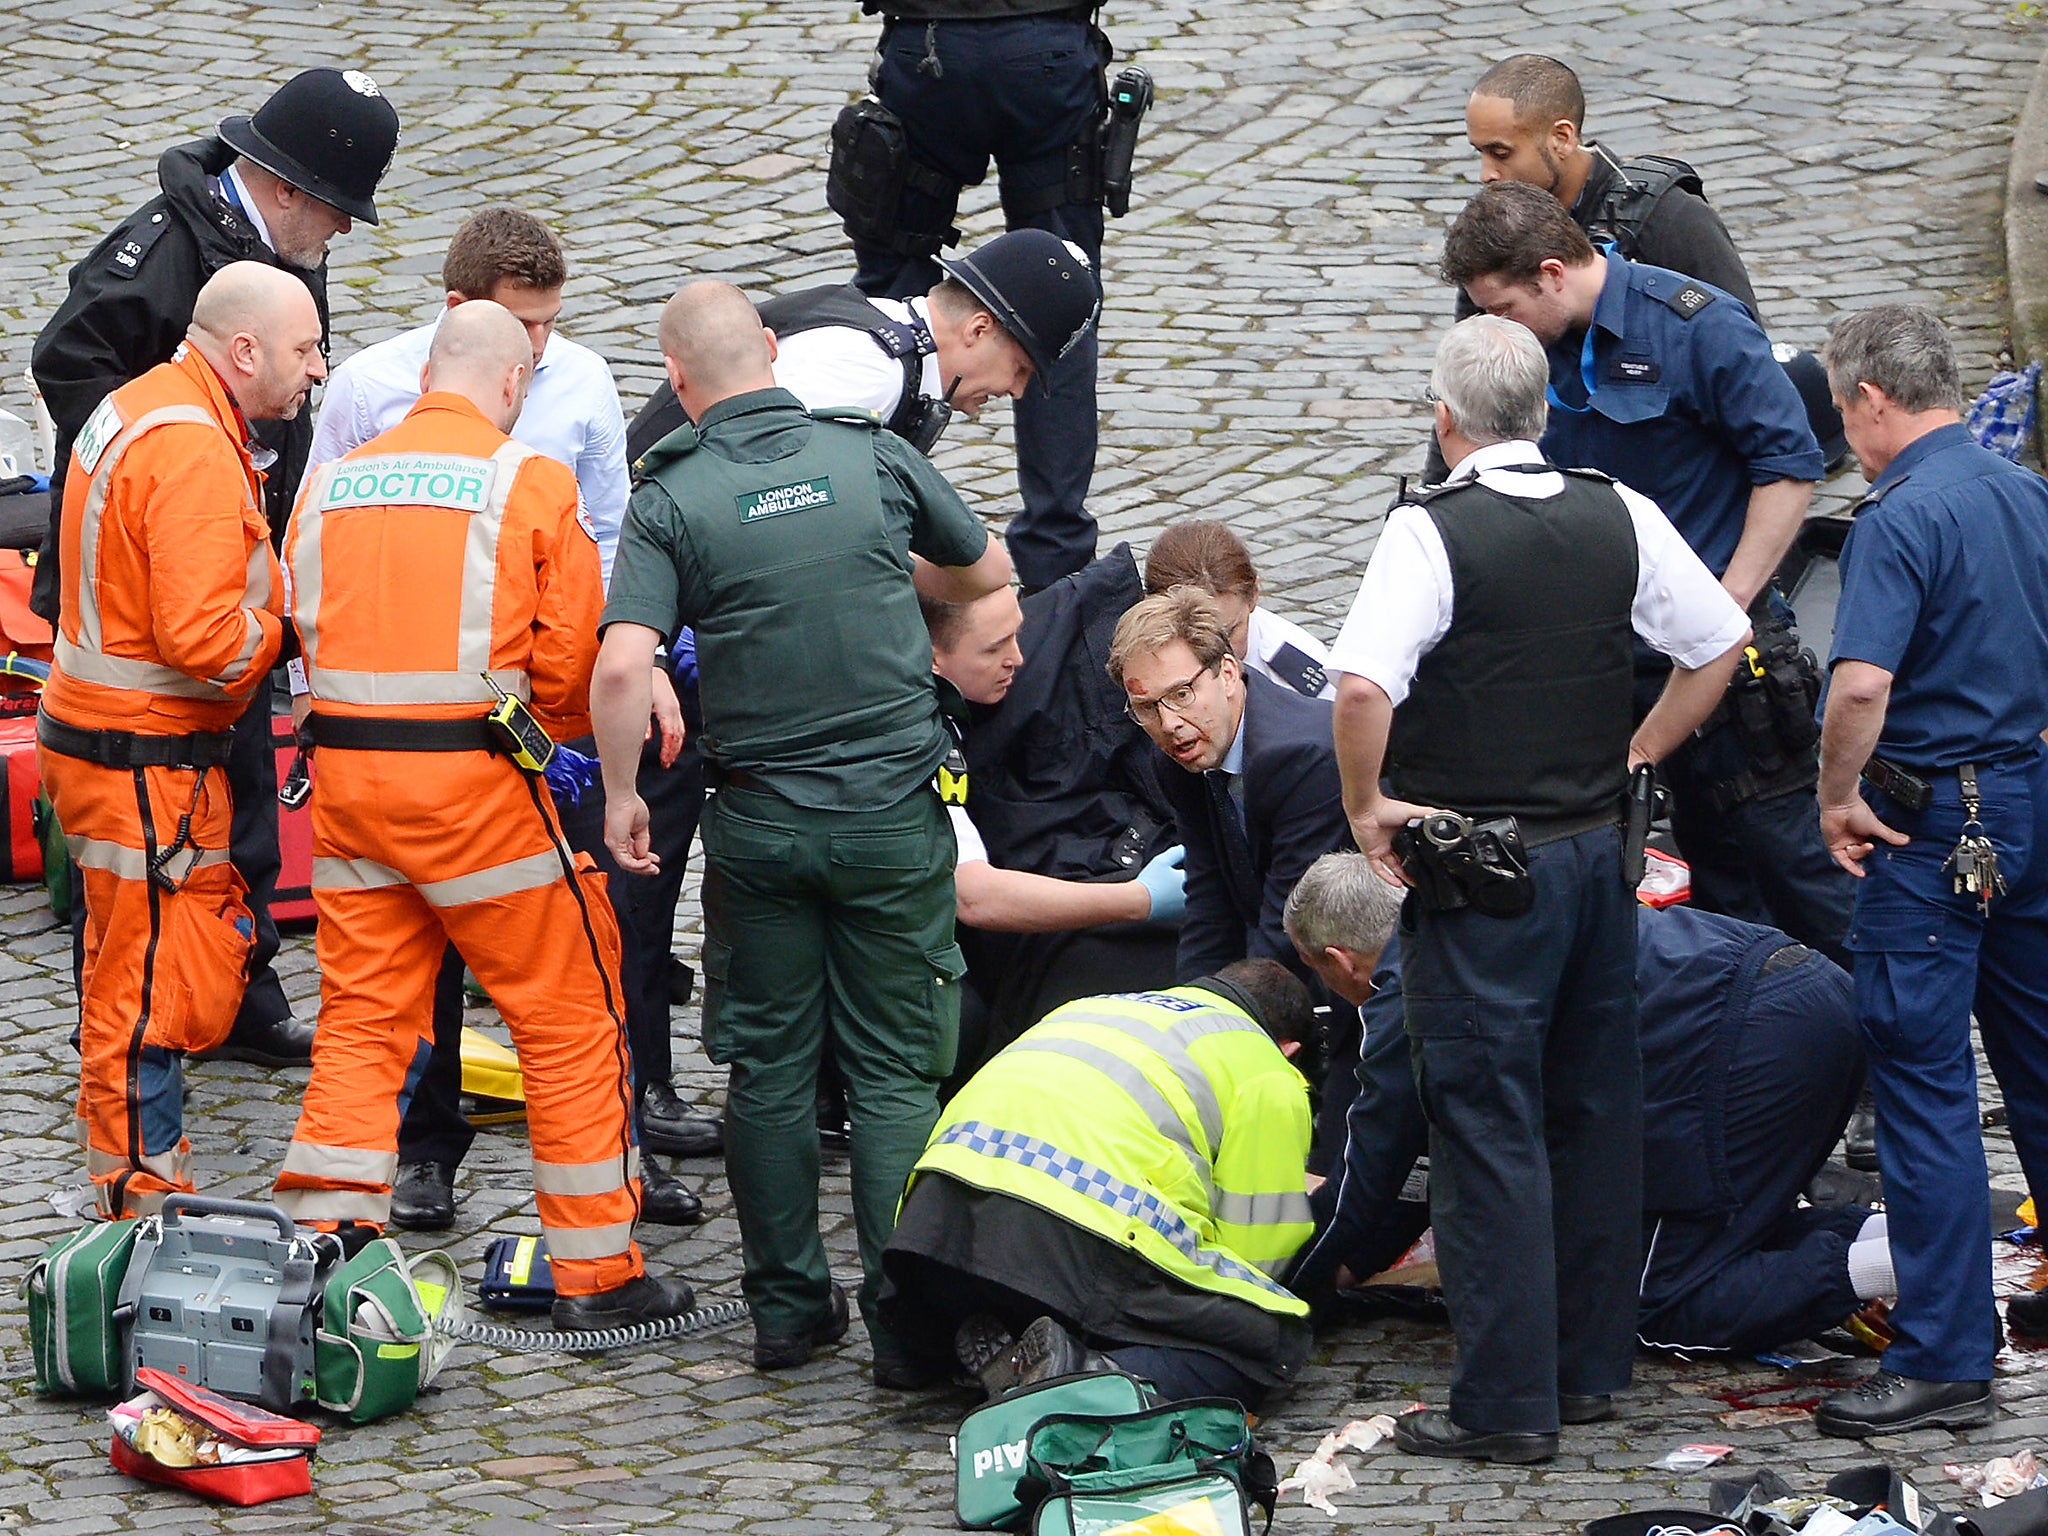 Conservative MP Tobias Ellwood (centre) helps emergency services attend to a police officer outside the Palace of Westminster, London, after a policeman was stabbed and his apparent attacker shot by officers in a major security incident at the Houses of Parliament